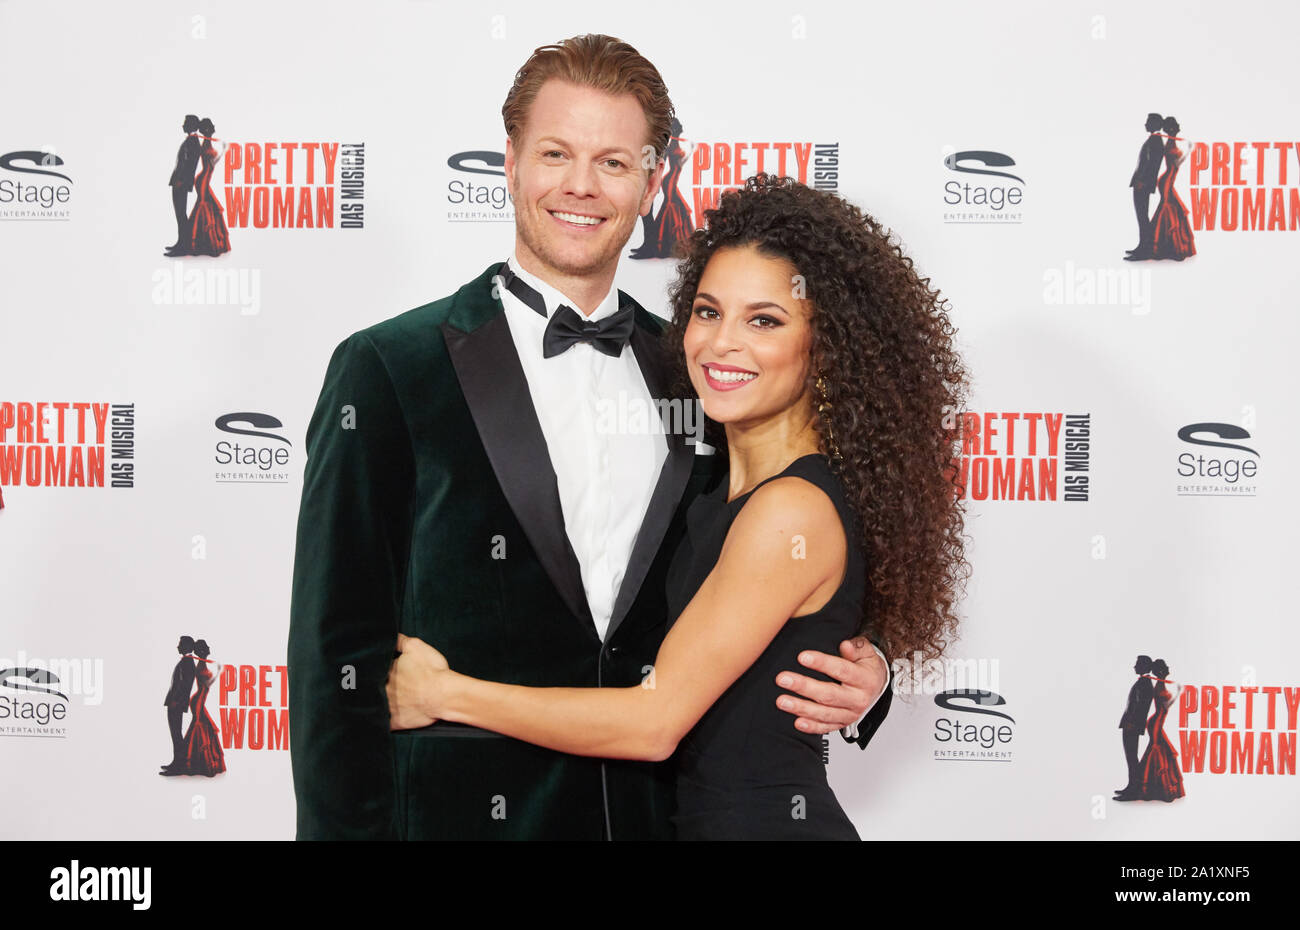 Hamburg, Germany. 29th Sep, 2019. Mark Seibert and Patricia Meeden, musical performers, come to the European premiere of the musical 'Pretty Woman' at the Stage Theater an der Elbe. Credit: Georg Wendt/dpa/Alamy Live News Stock Photo